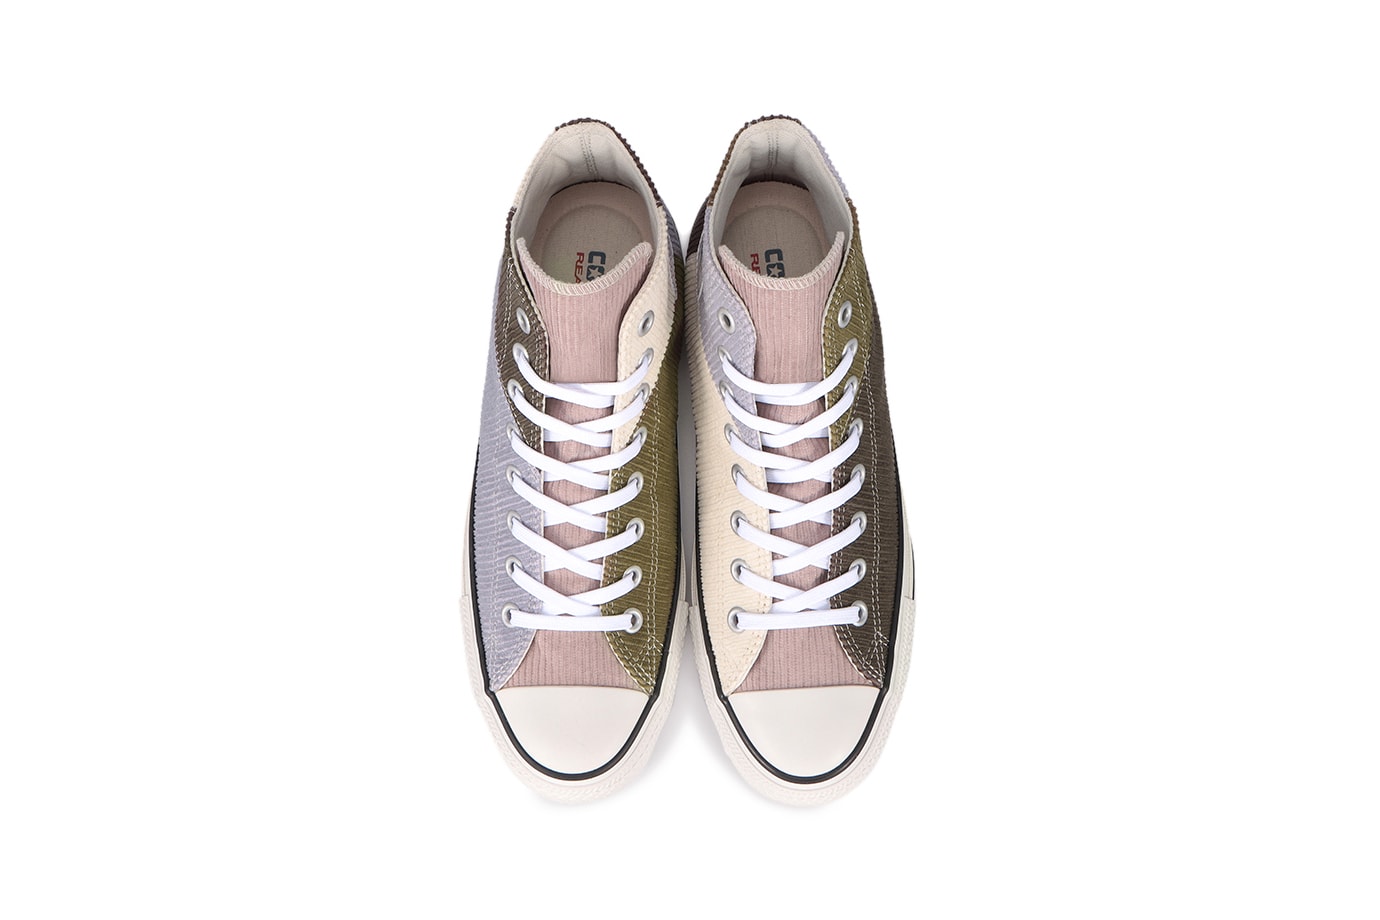 Converse Japan Chuck Taylor All Star Hi Corduroy "Gray/Brown" Lilac Green Cream Pink Sneaker Release Information Closer Look Release Date Footwear Limited Edition Fall Winter 2020 FW20 